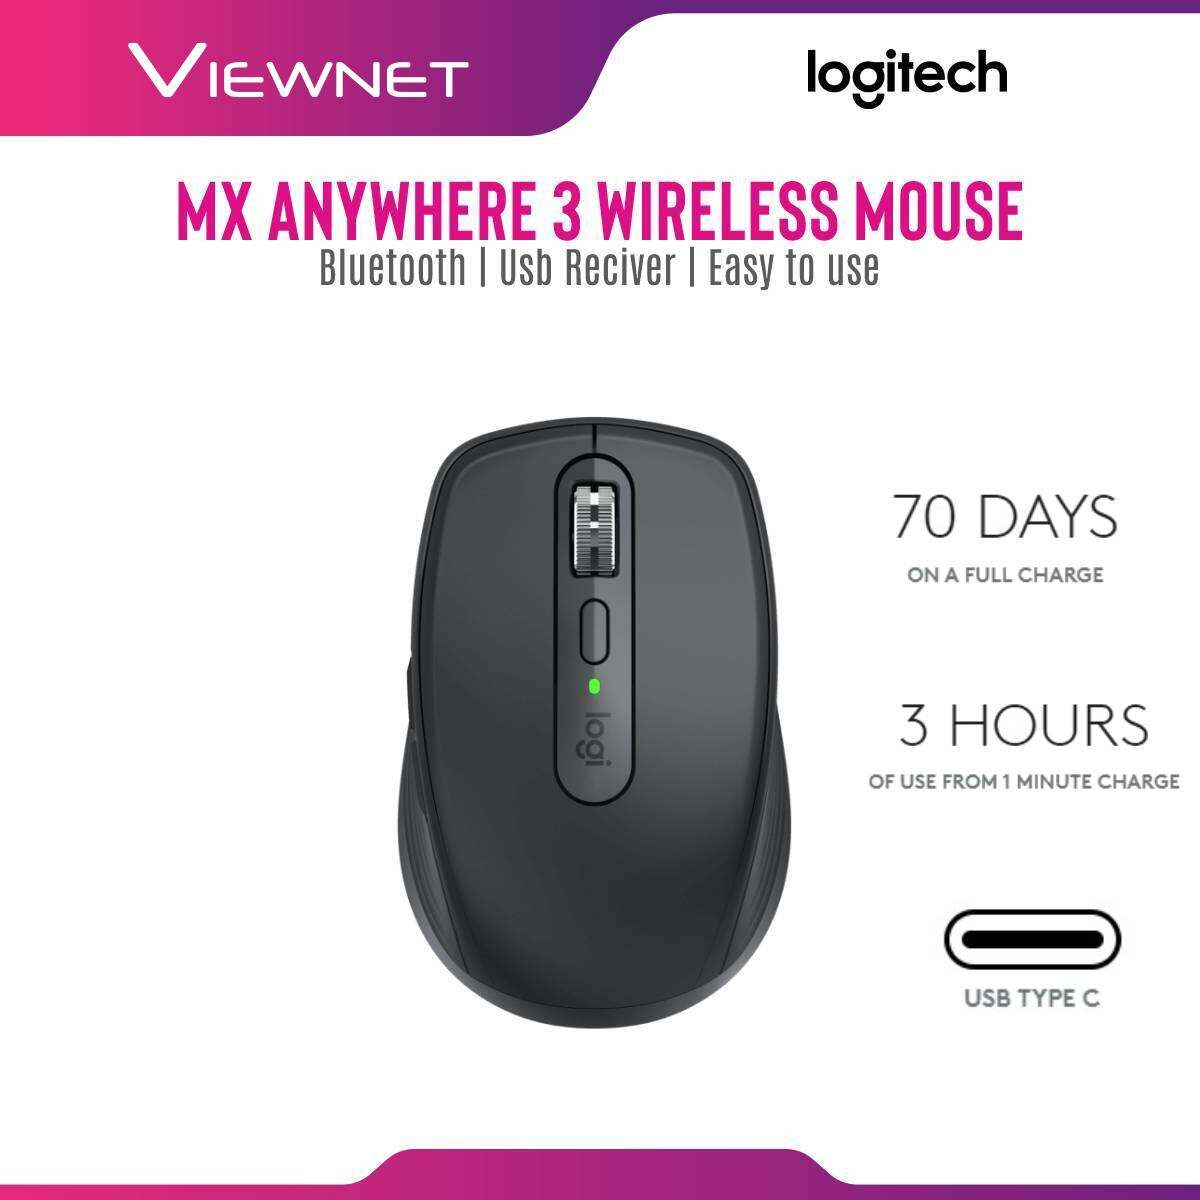 Logitech MX Anywhere 3 Master series of wireless mouse Ultimate versatility with remarkable performance